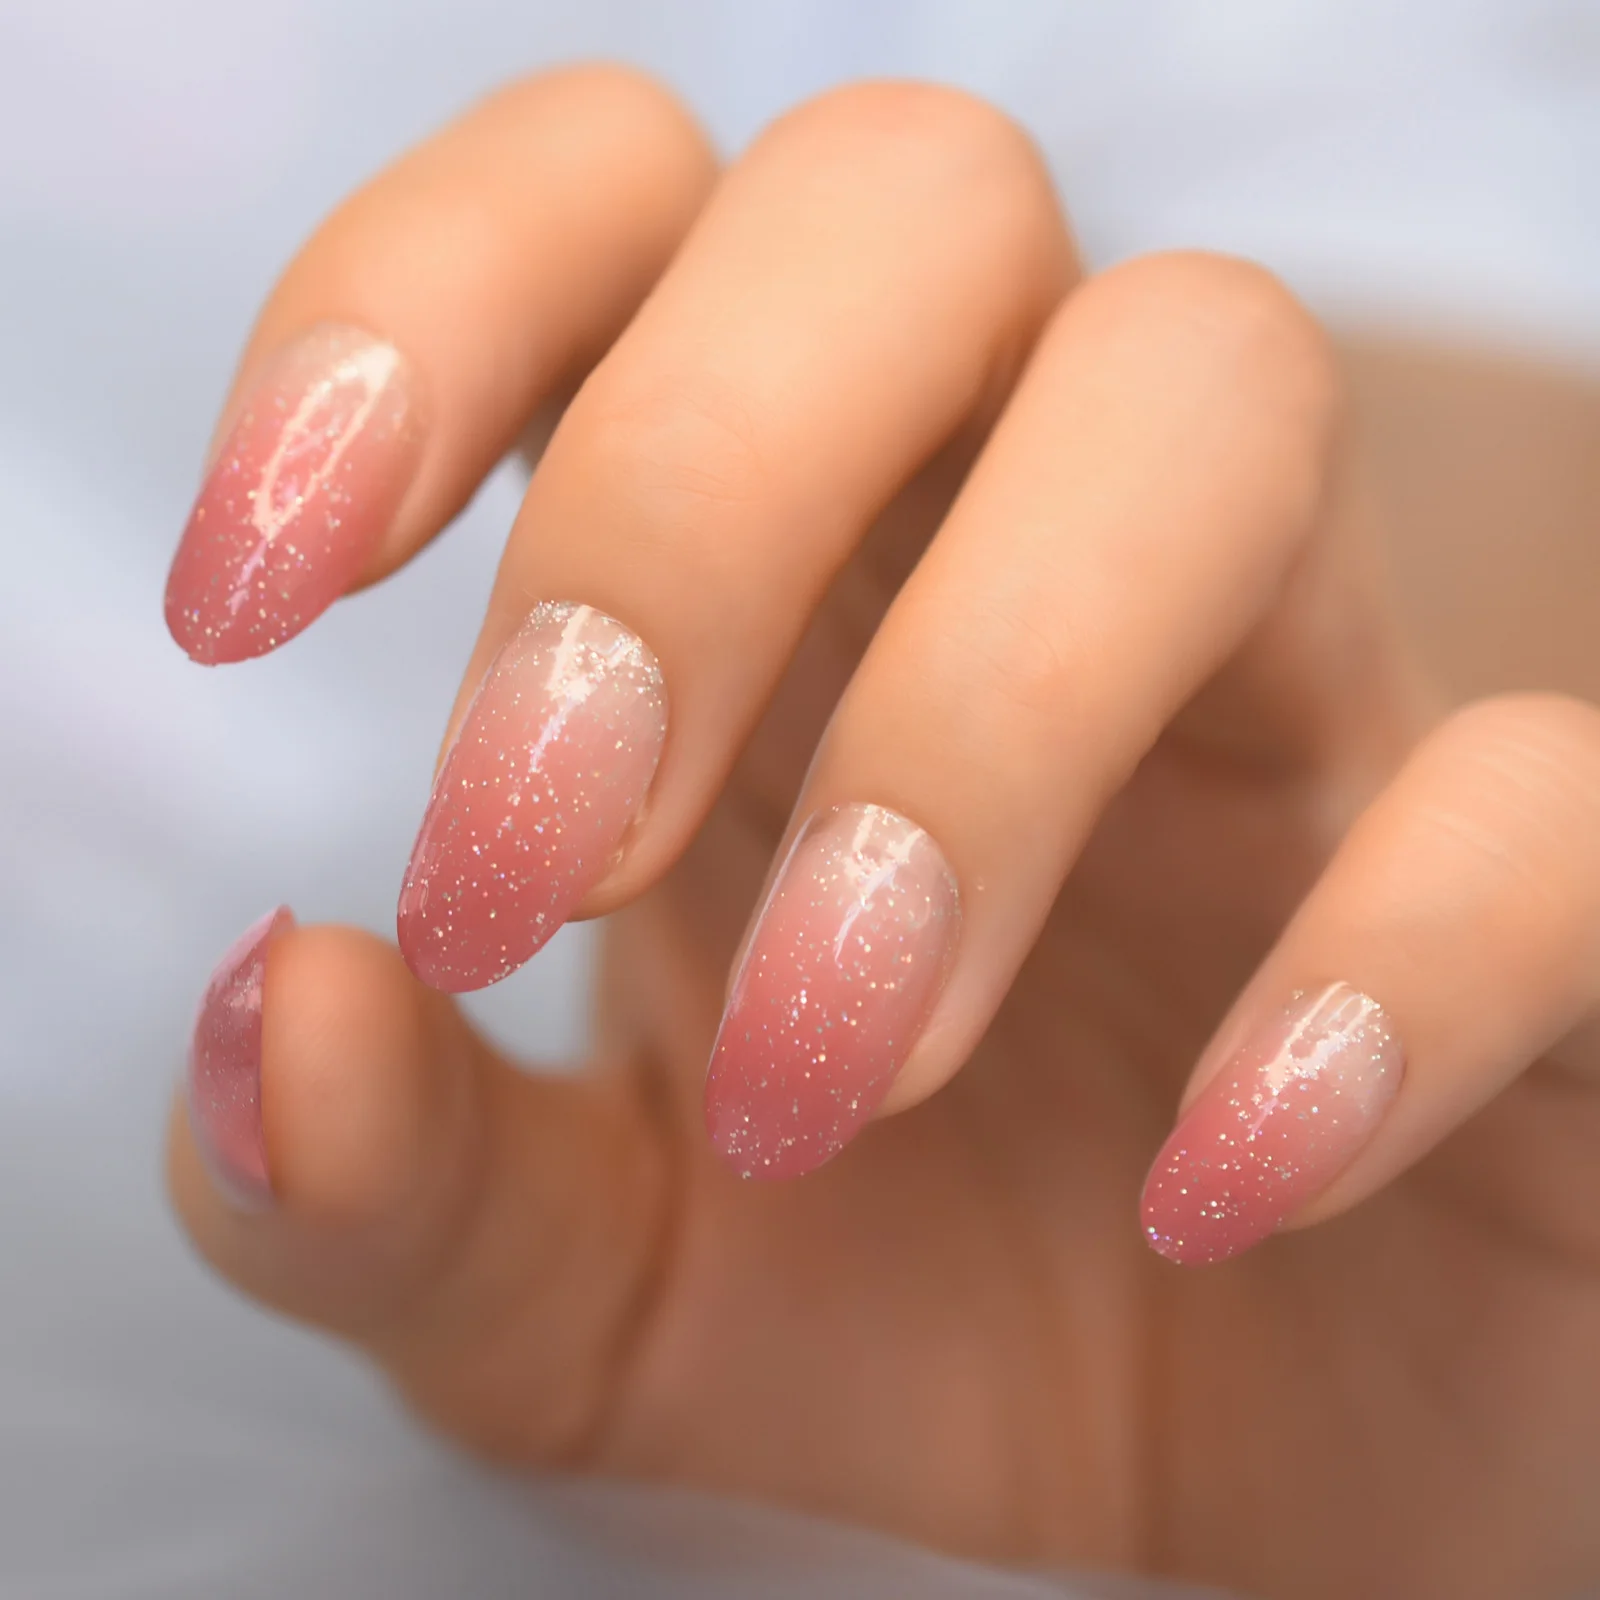 False Nails Oval Round Medum Fake Nail Art Tips With Design Press On Ombre  Glitter Acrylic Artificial Gel Nails Kit Pink Display _ - Aliexpress Mobile